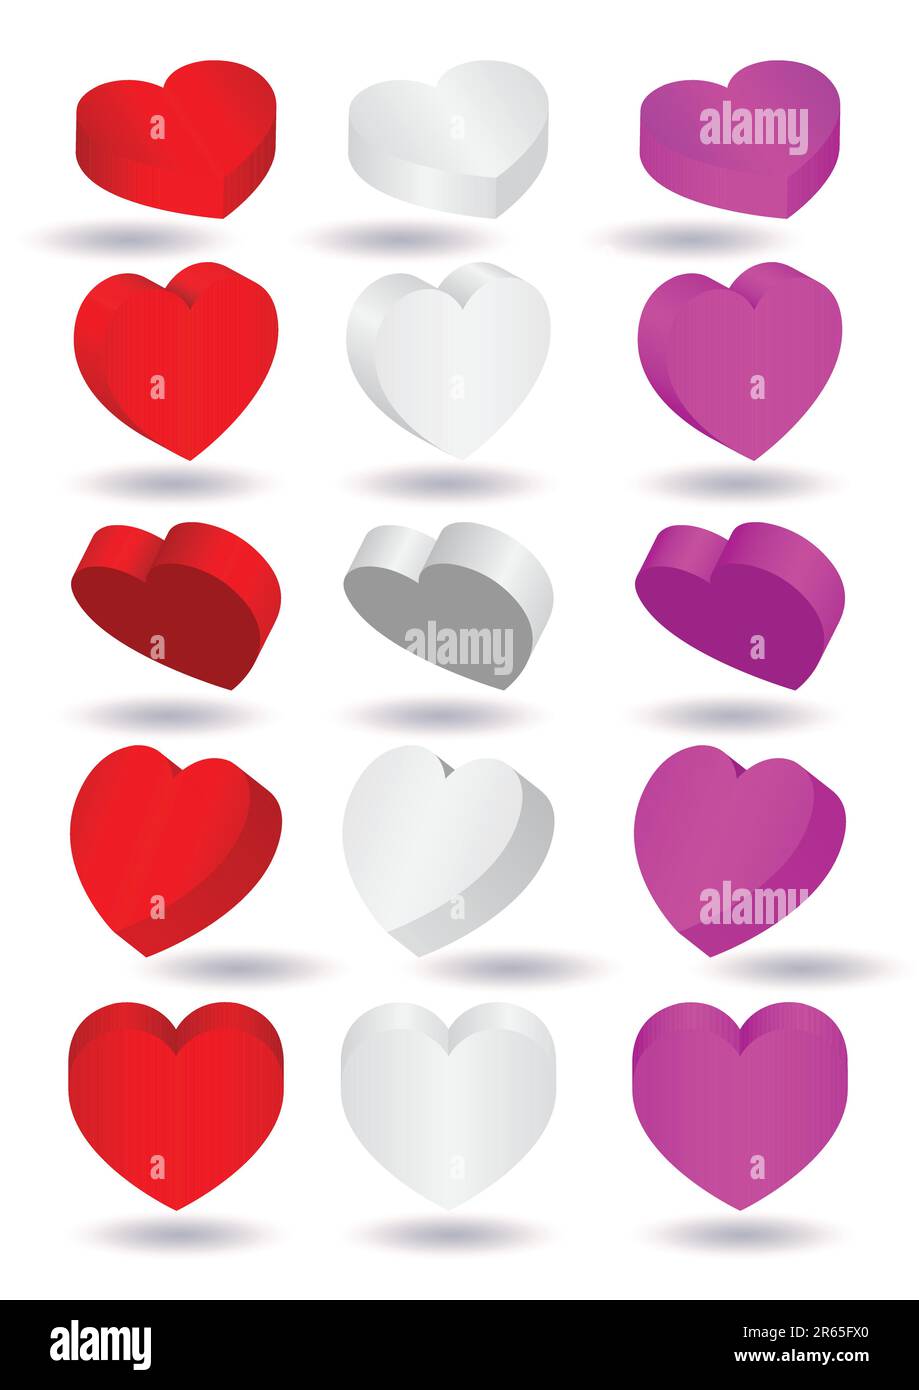 Vector illustration of 3D heart shape in different colors and views. All vector objects and details are isolated and grouped. Colors and background... Stock Vector